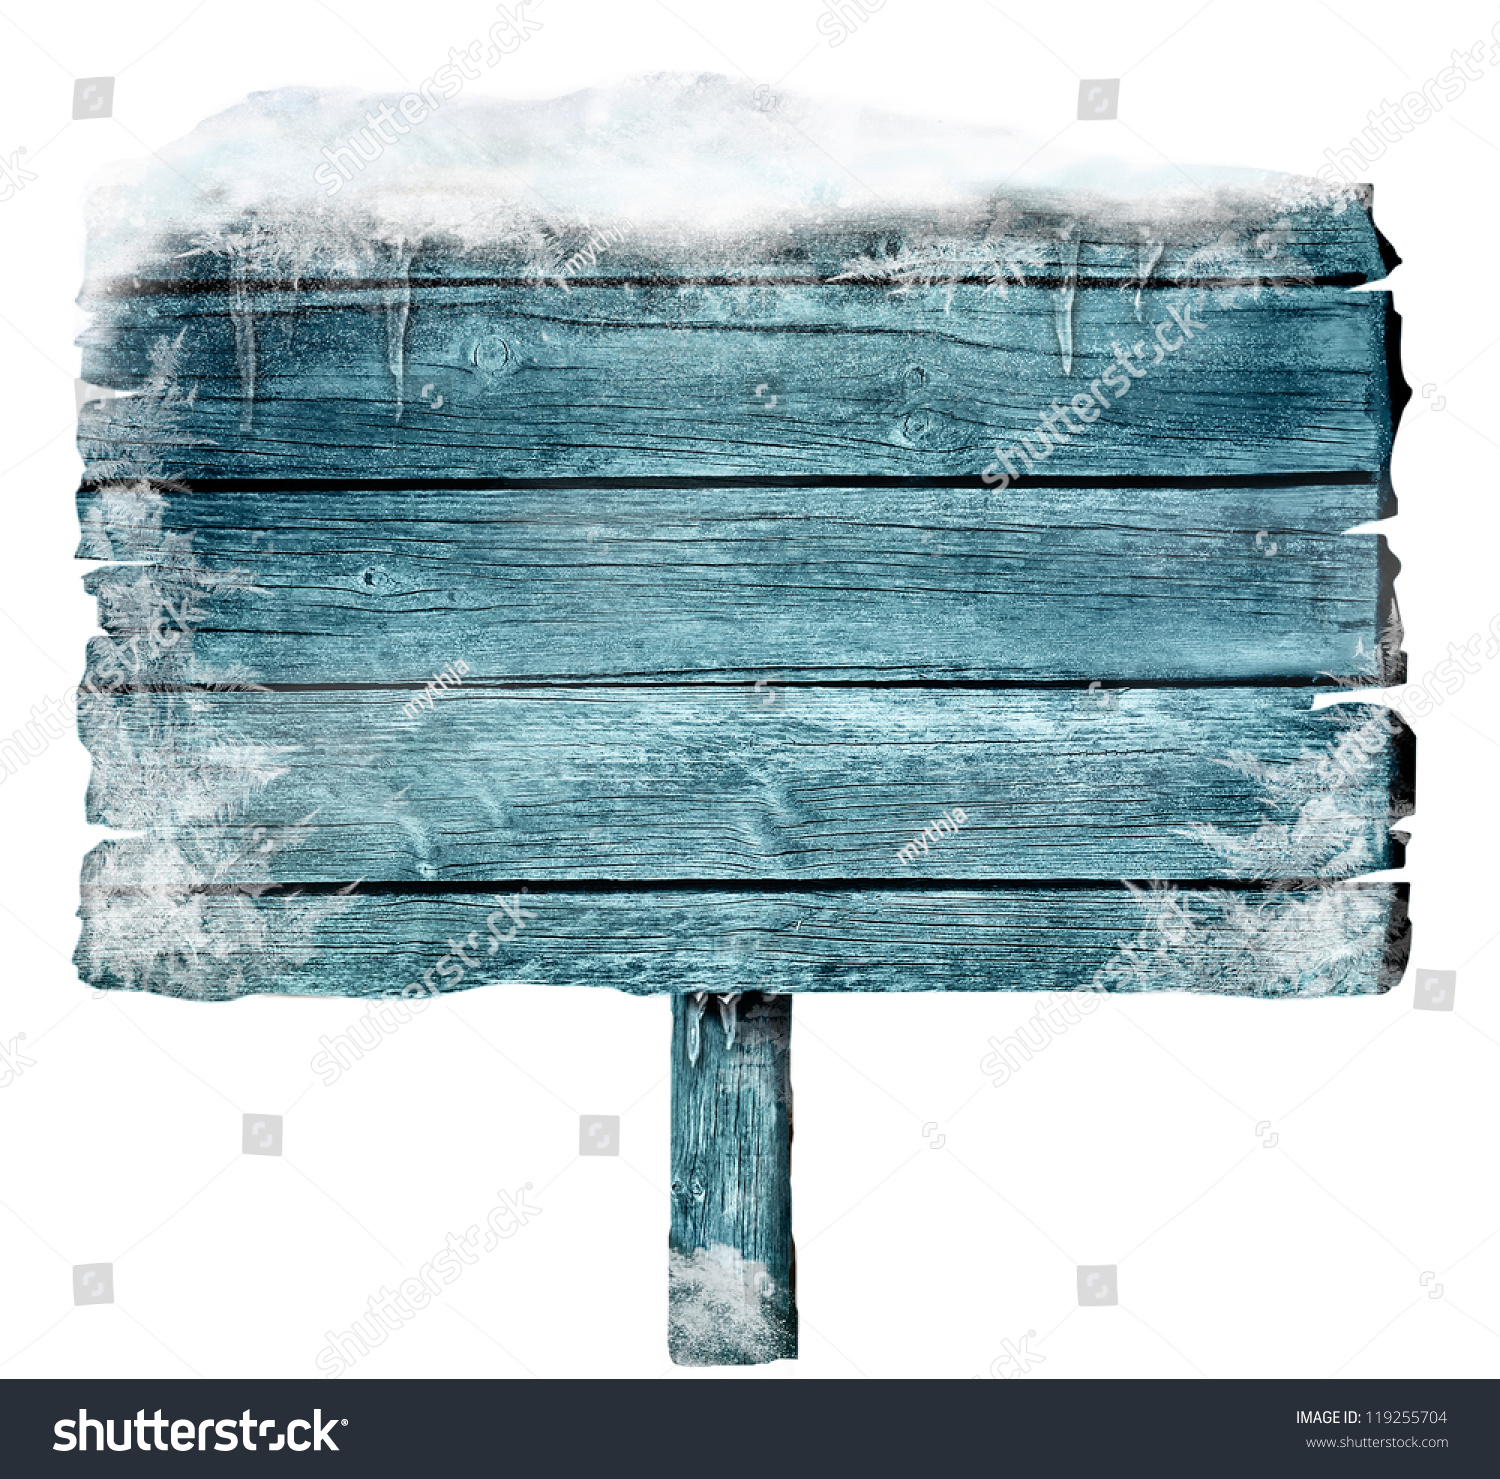 Wooden sign in winter with copyspace. Frozen wood sign with snow, ice and crystals. Space for your text. #119255704